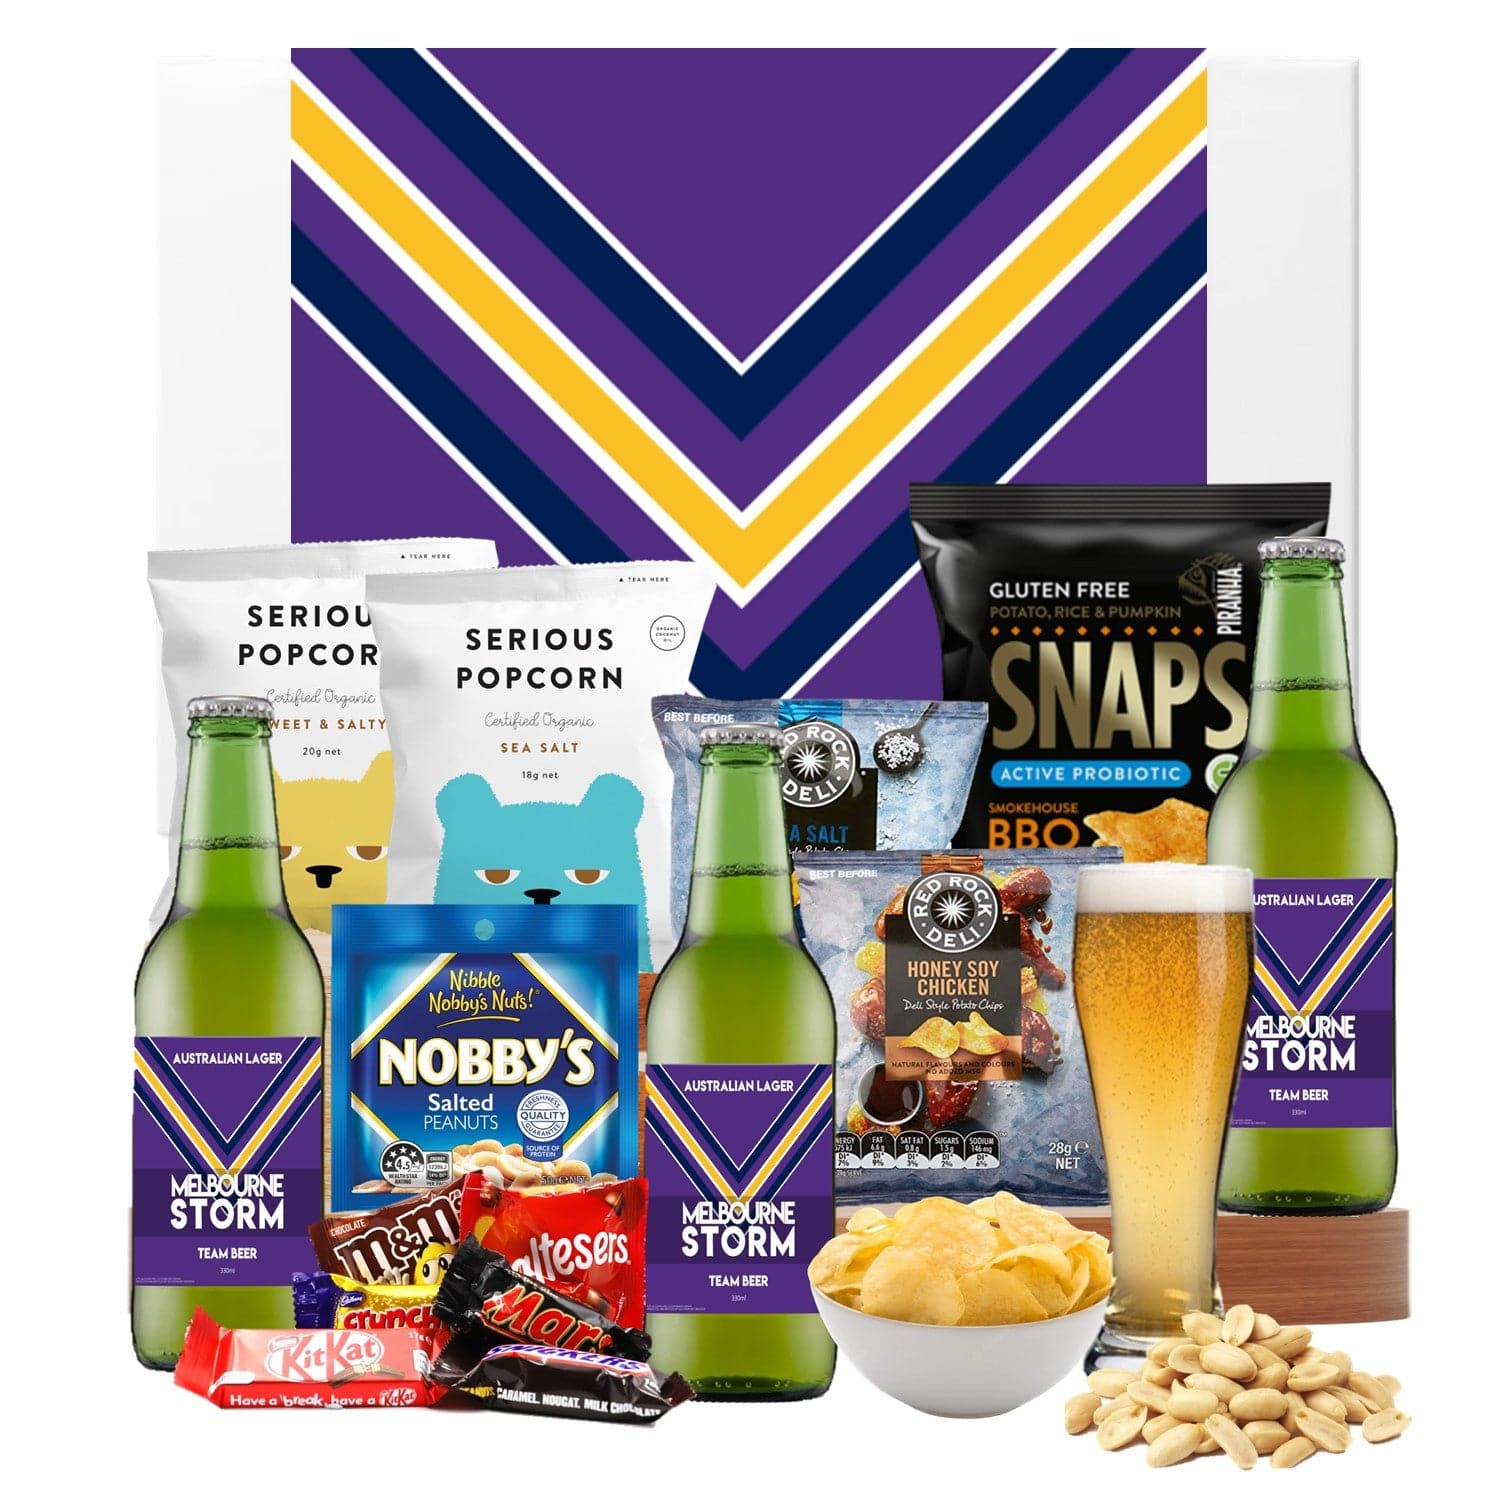 The NRL Beer Sports Pack